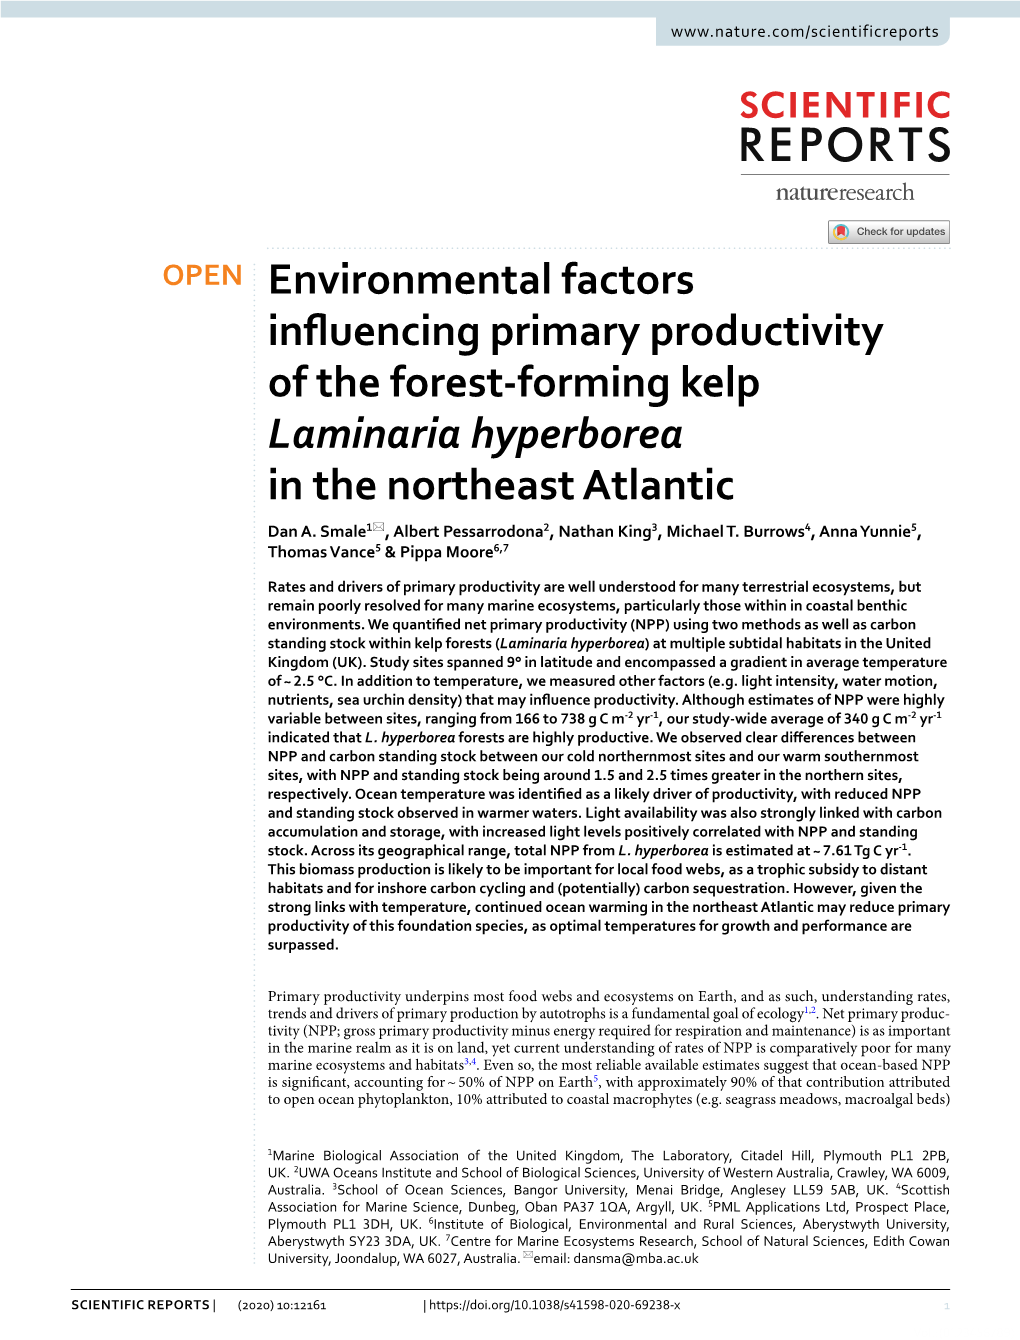 Environmental Factors Influencing Primary Productivity of The